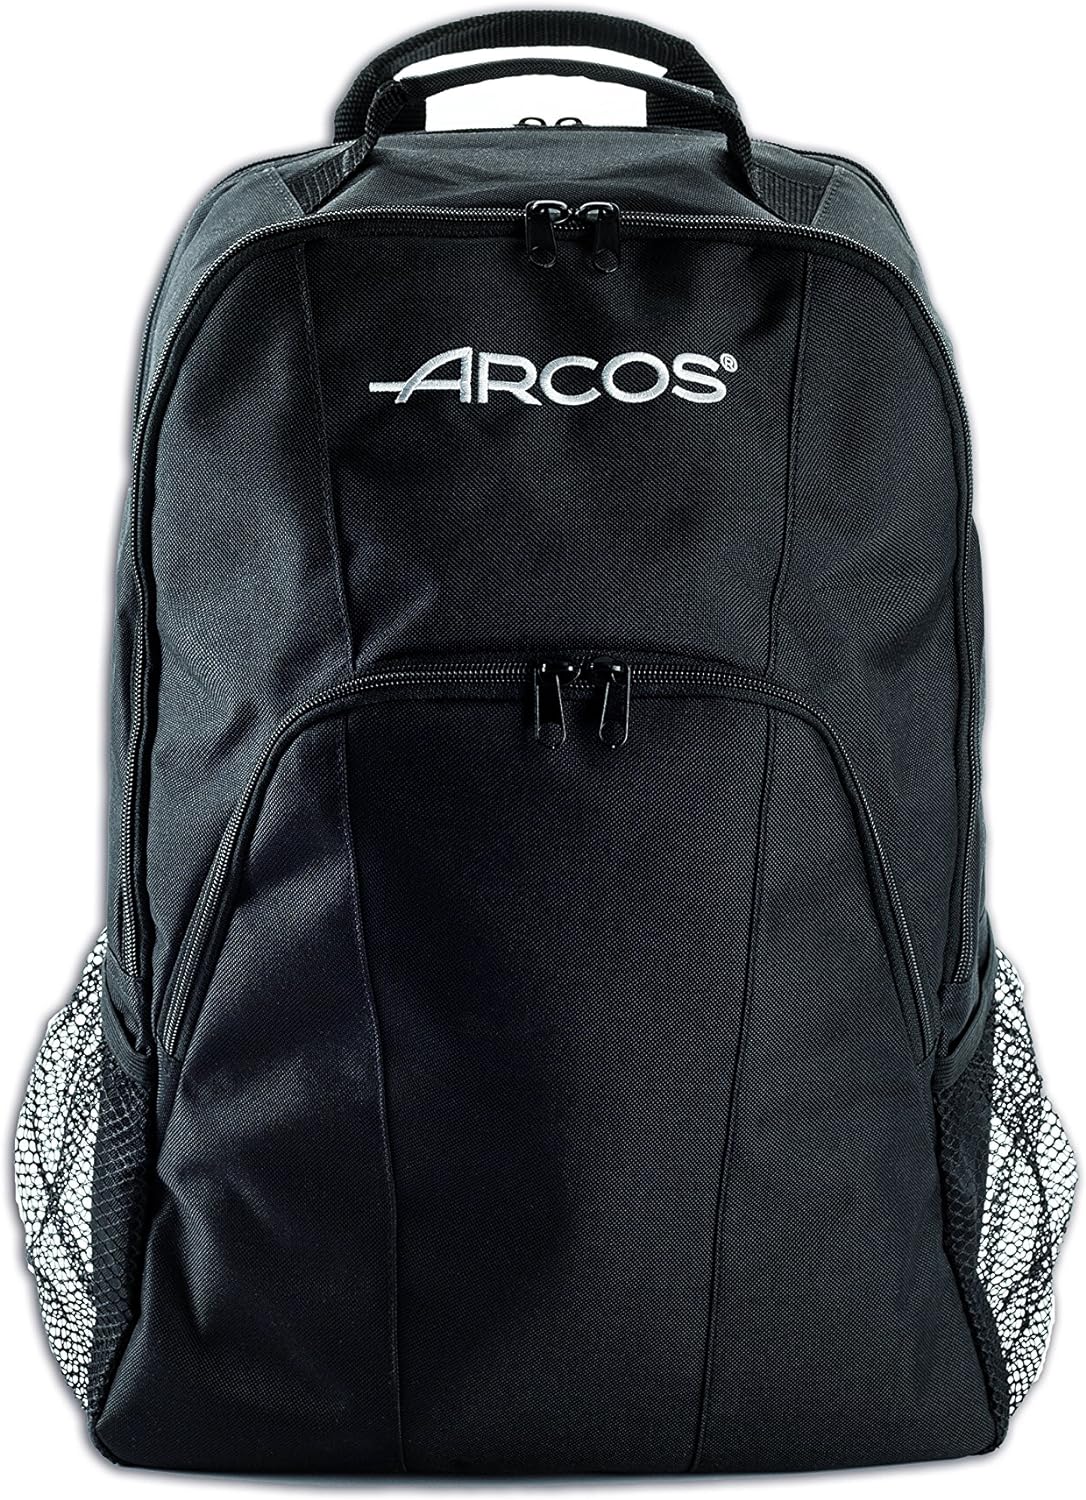 Arcos 9pc Knife Backpack